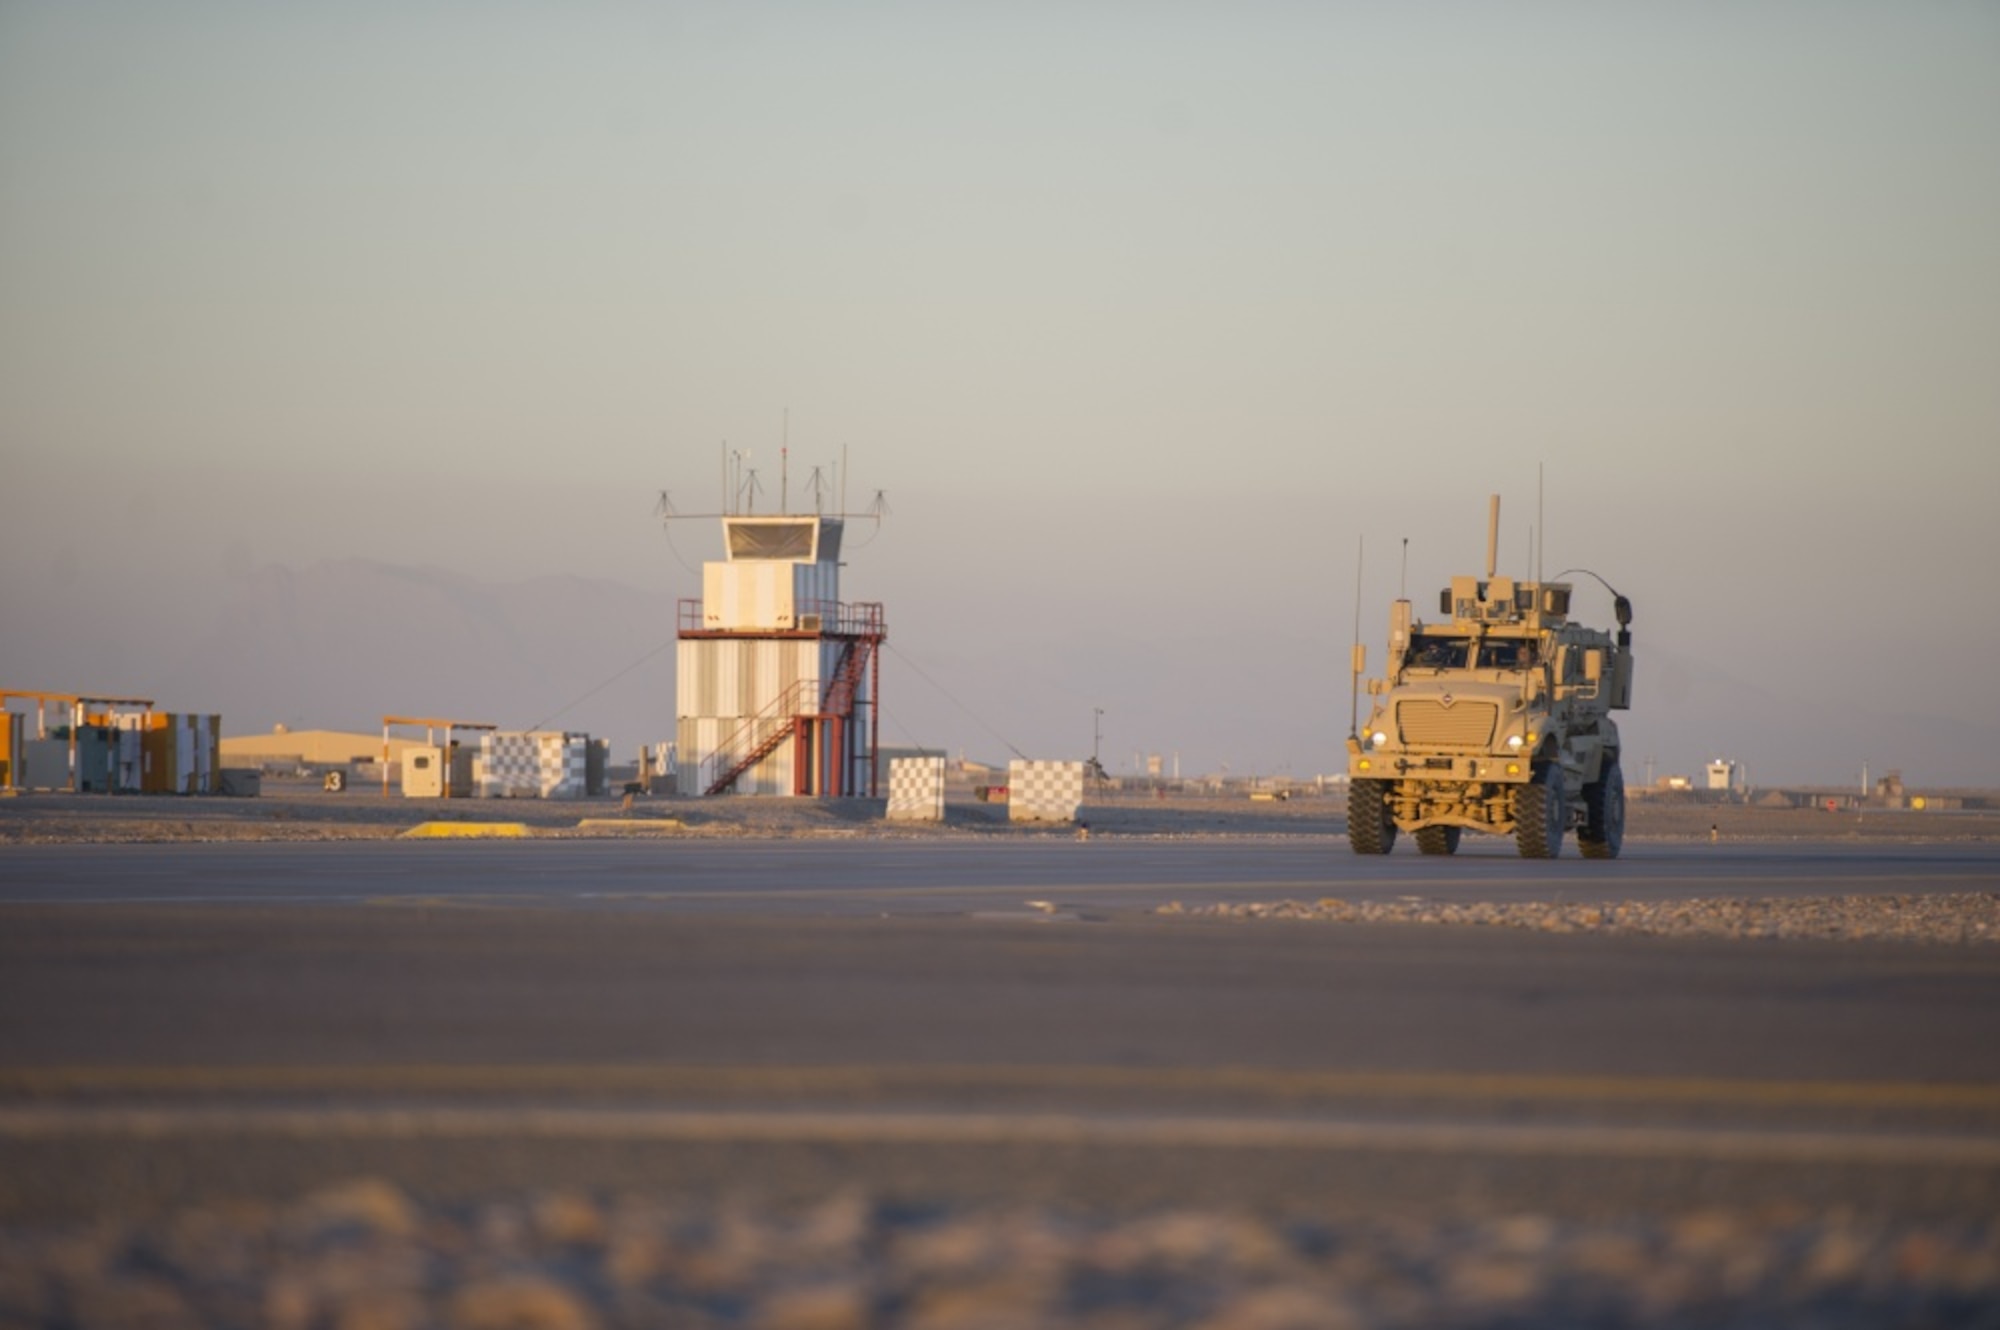 A Mine Resistant Ambush Protected vehicle, driven by a member of the 451st Expeditionary Support Squadron Security Forces Flight, patrols the flight line at Kandahar Airfield, Afghanistan, Jan. 20, 2016. The U.S. Air Forces Central Command Force Protection directorate at the Combined Air Operations Center at Al Udeid Air Base, Qatar, acts as the nexus of security operations across the area of responsibility to ensure security forces personnel can protect personnel, assets and, ultimately, the mission. (U.S. Air Force photo/Tech. Sgt. Robert Cloys) 